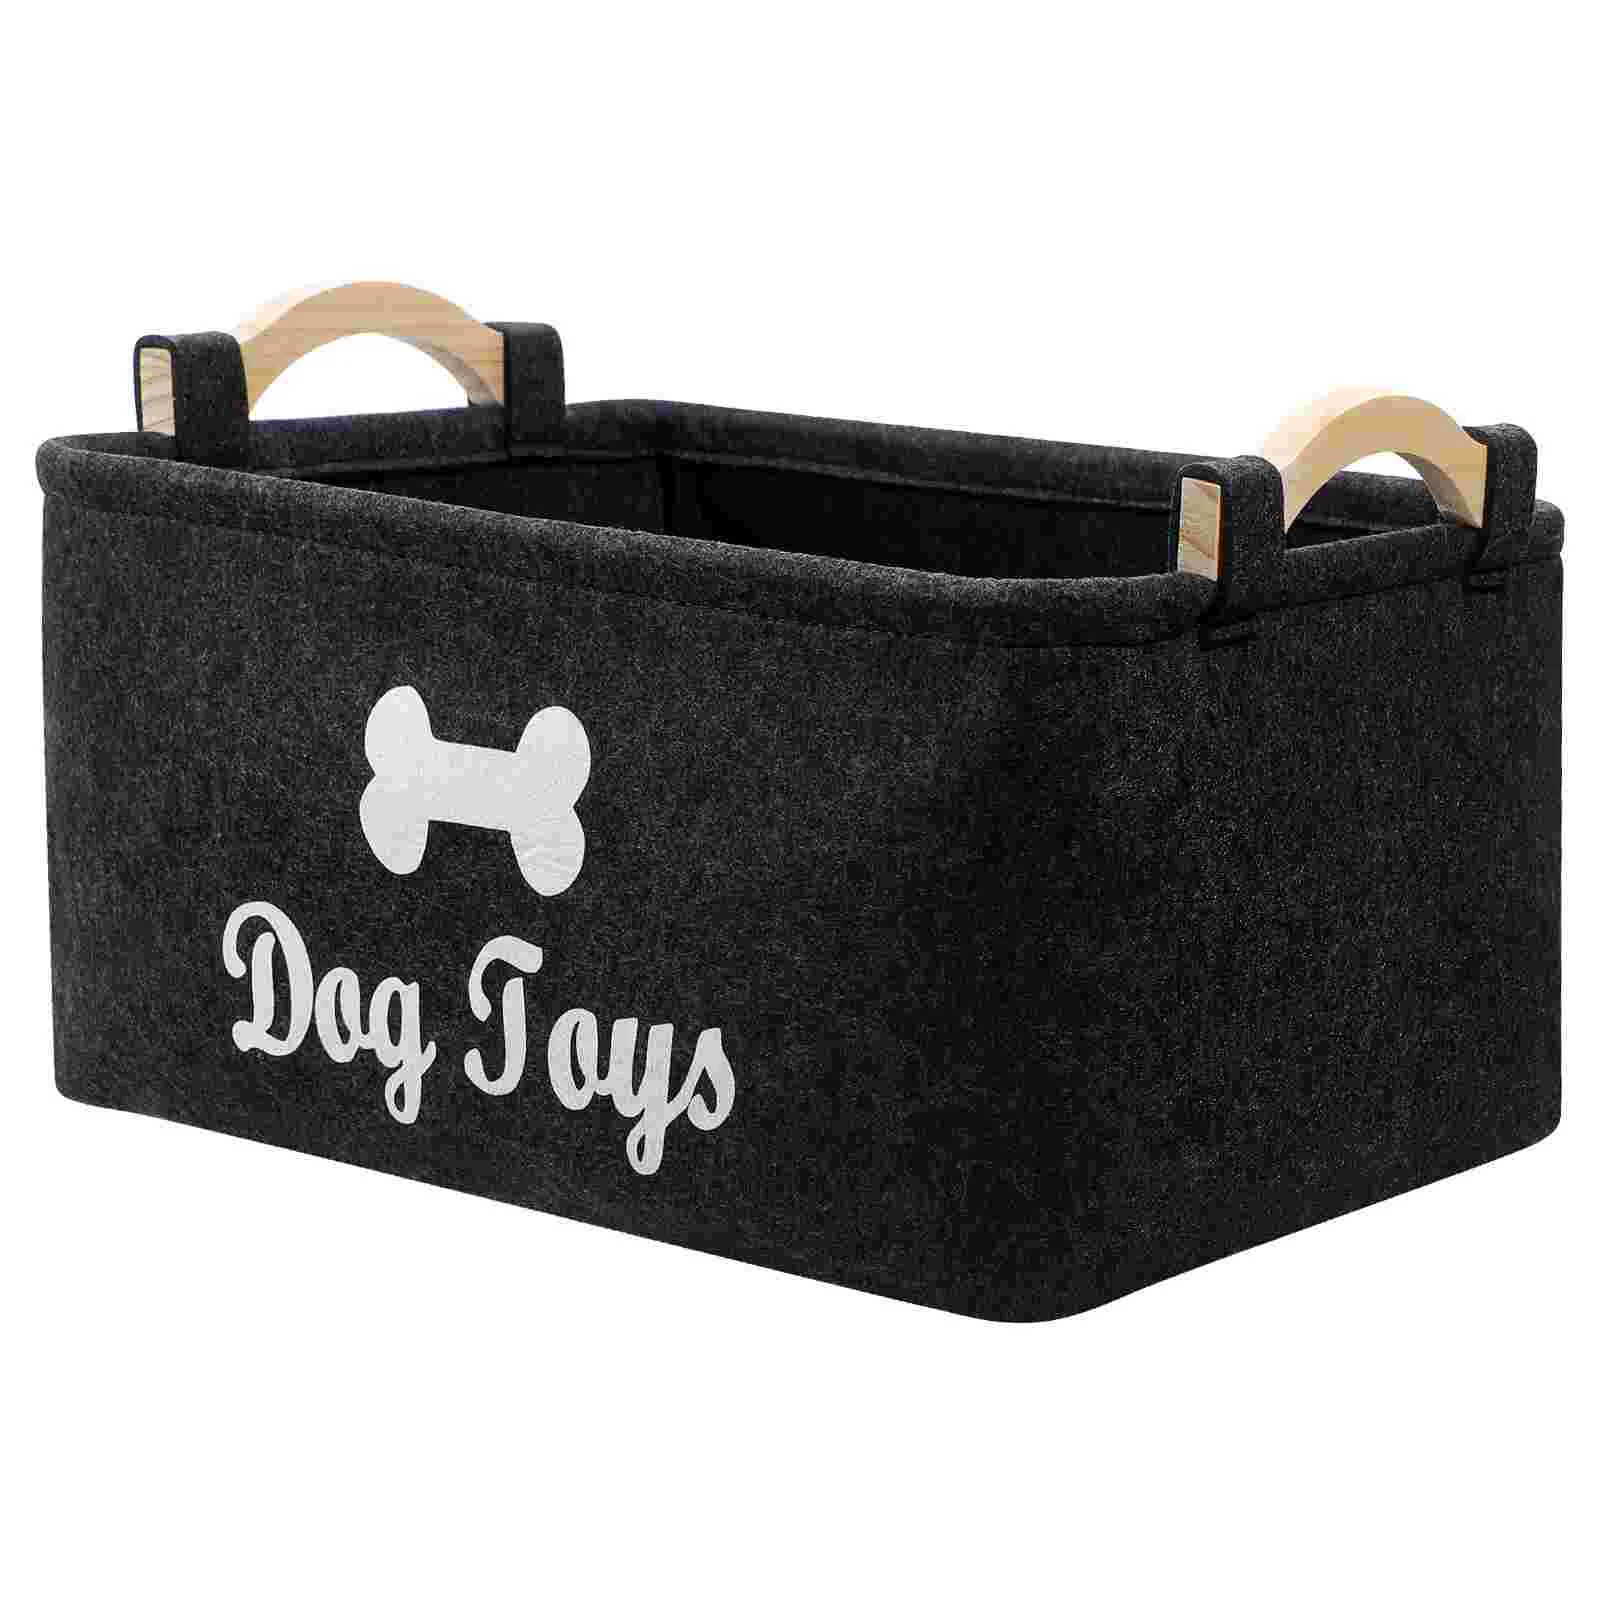 Storage For Dog Supplies Organization And Storage Box Felt Storage Bins Collapsible Cube Basket Container Box for Leash